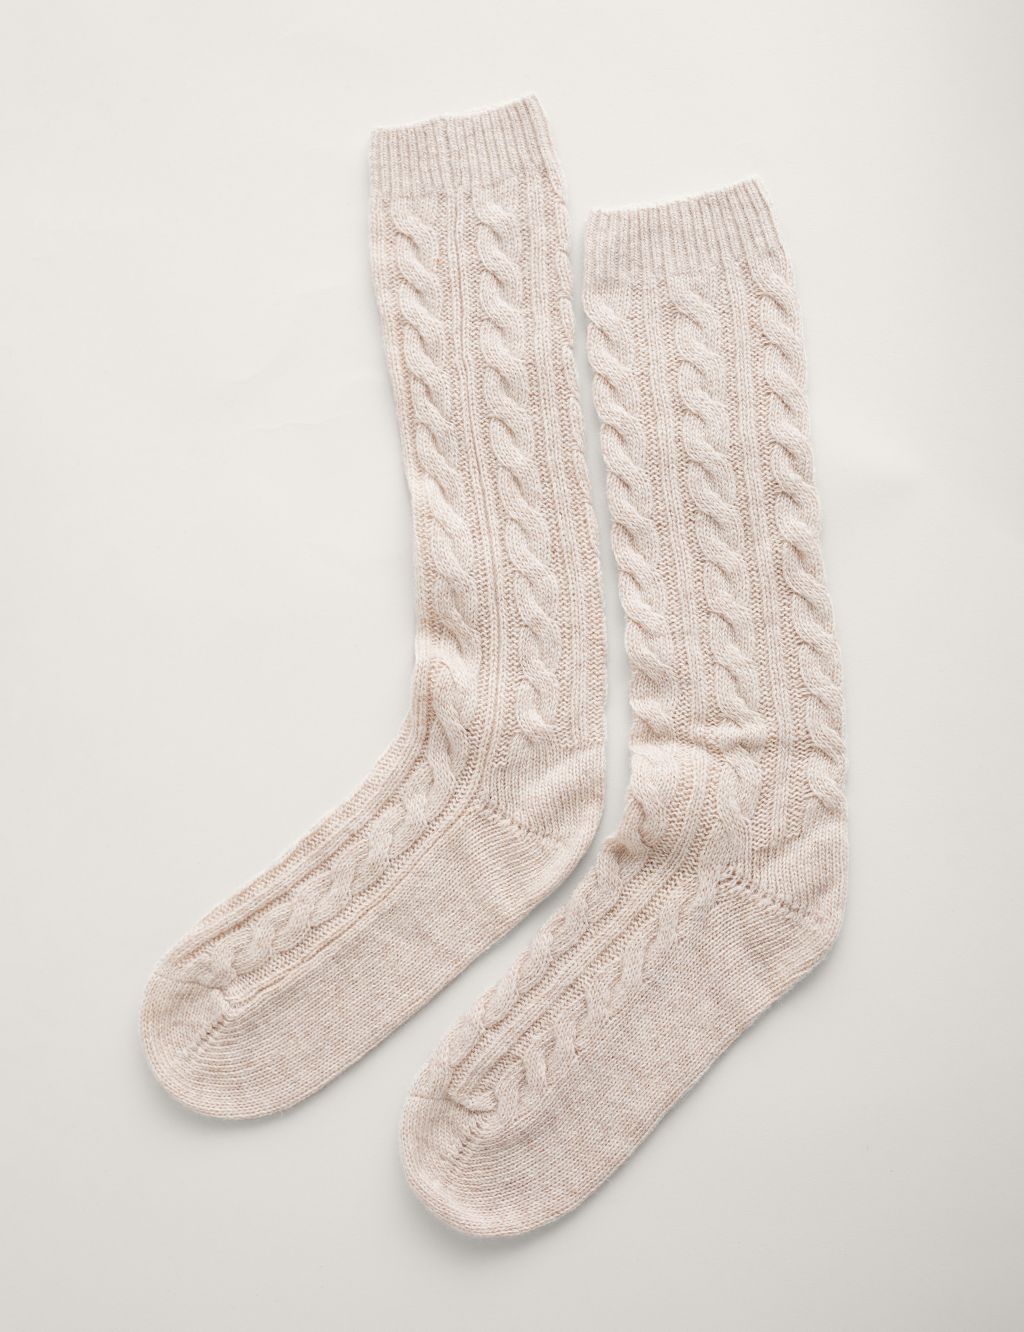 Wool Blend Cable Knit Ankle High Socks image 1